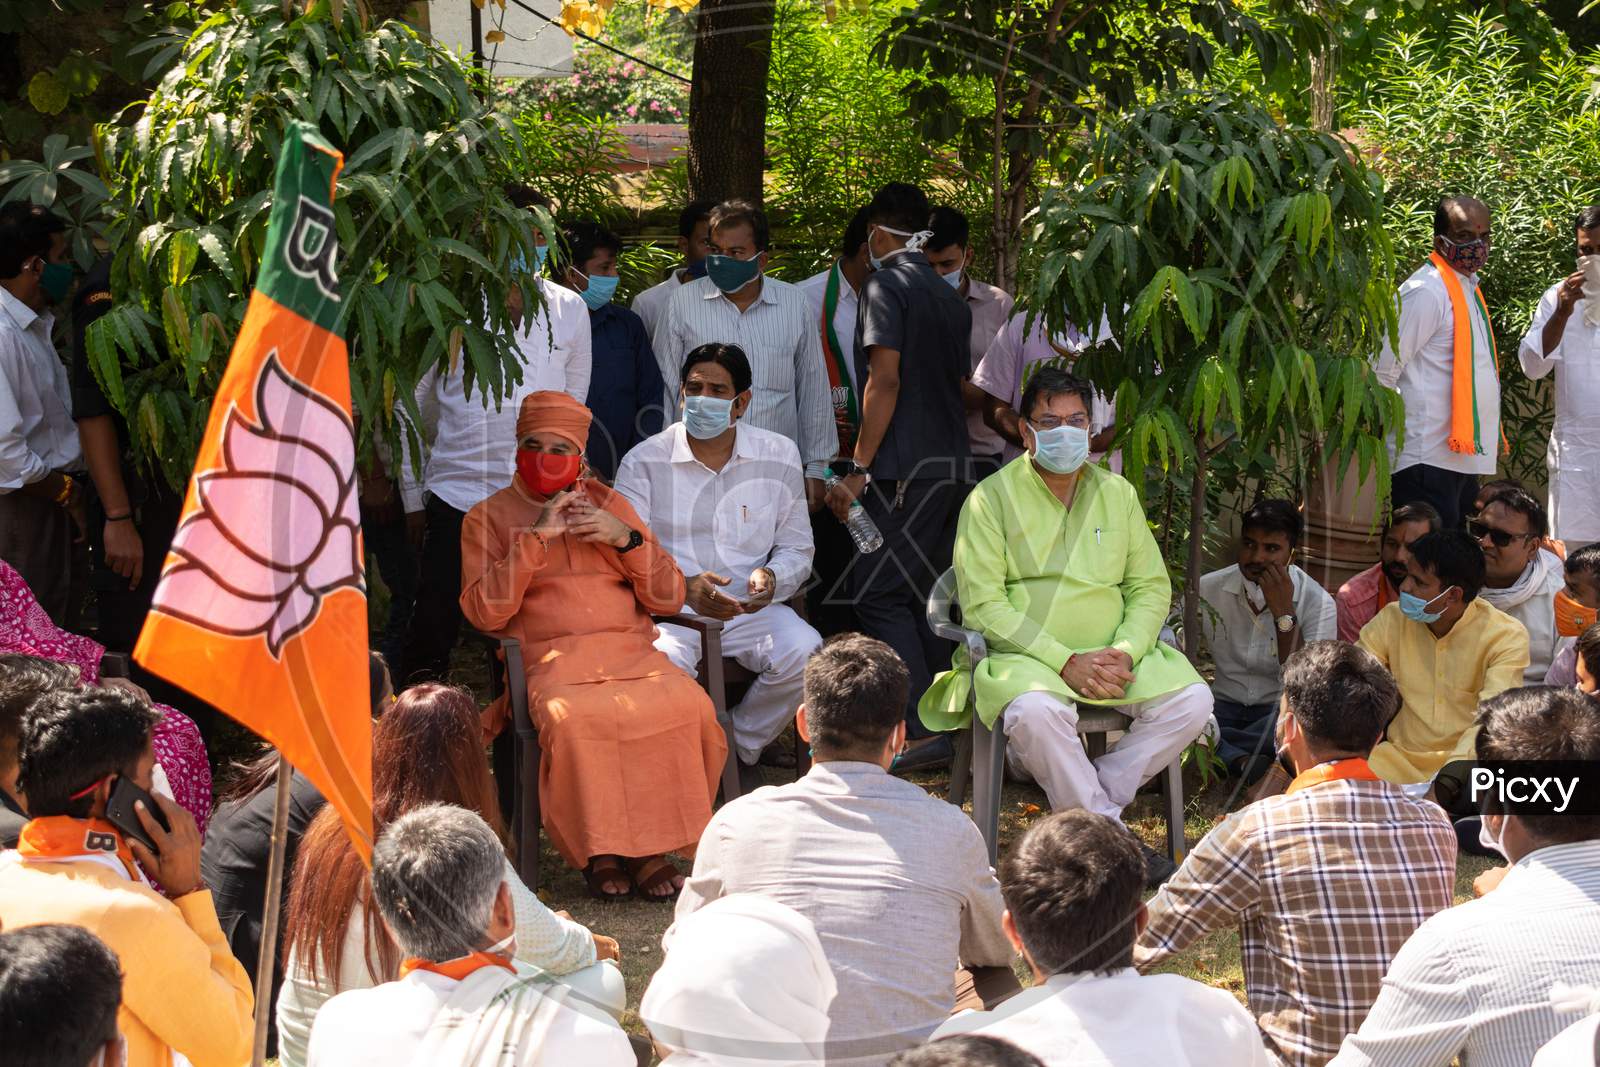 Satish Poonia, head of Bharatiya Janata Party, Rajasthan, addressing BJP supporters after 'Halla Bol' protest in regarding the failures of the state government in crime prevention against women, Jaipur, 5 October, 2020